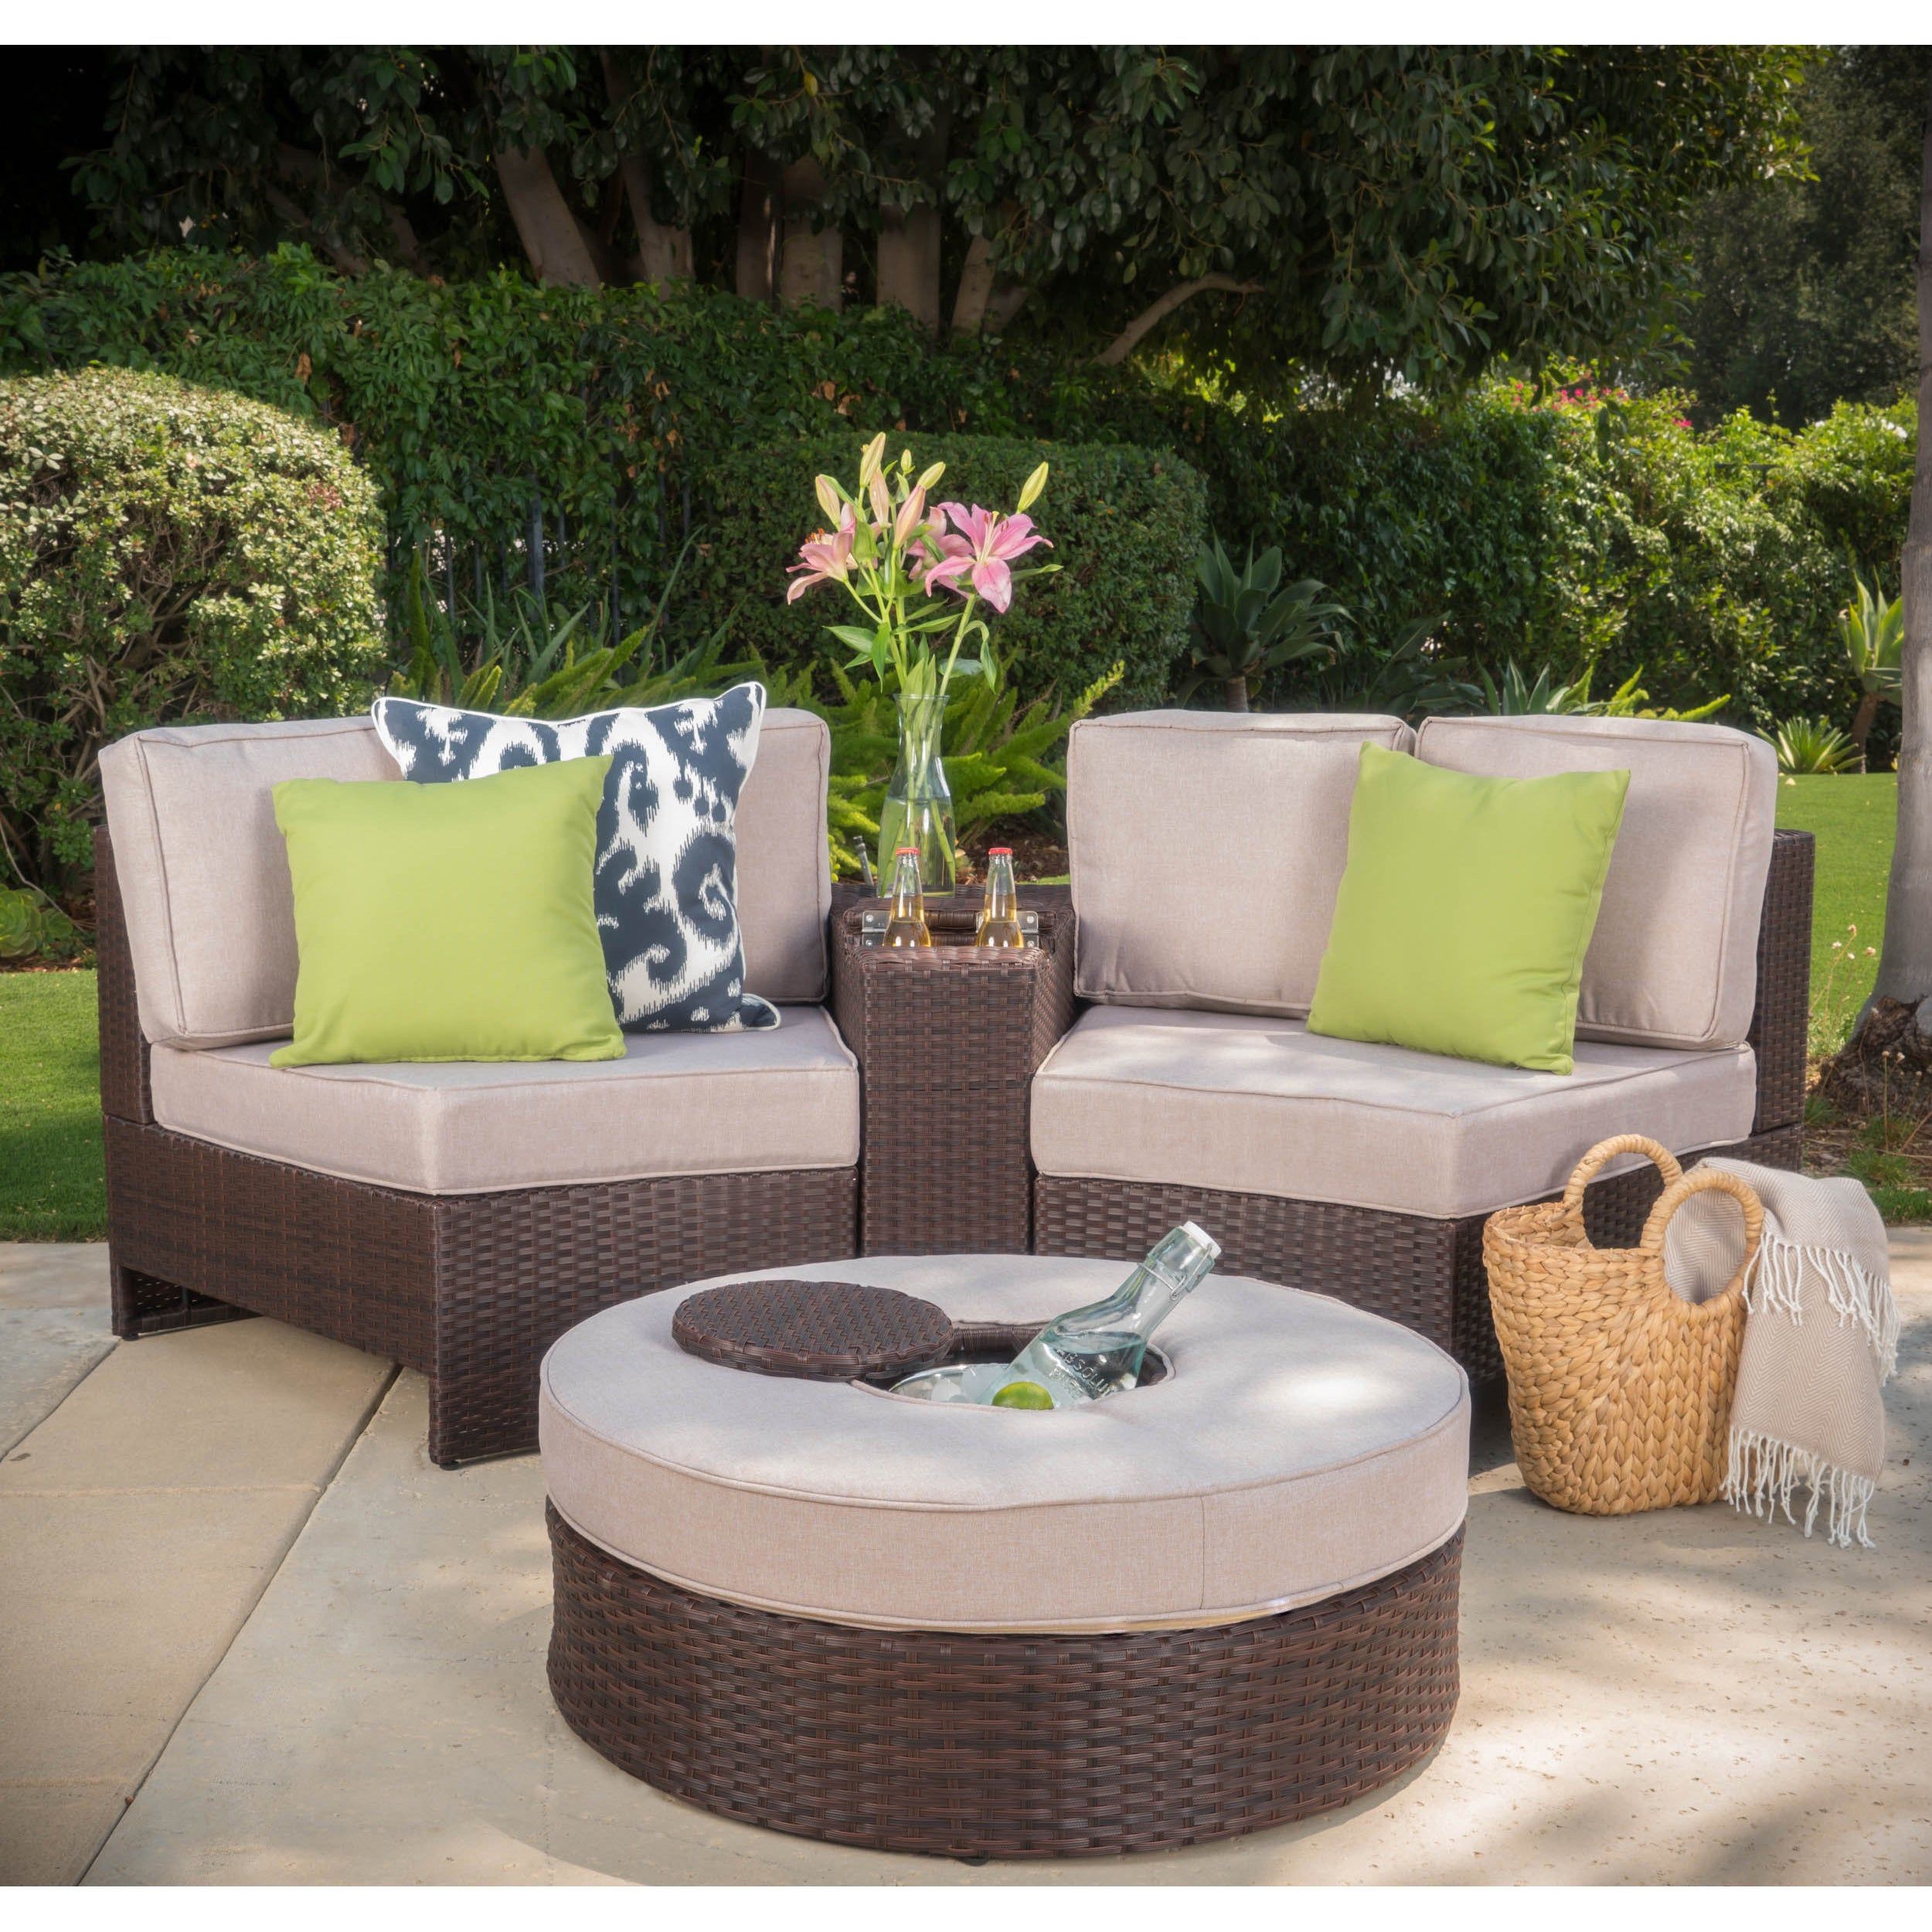 Affordable Outdoor Patio Furniture Sets